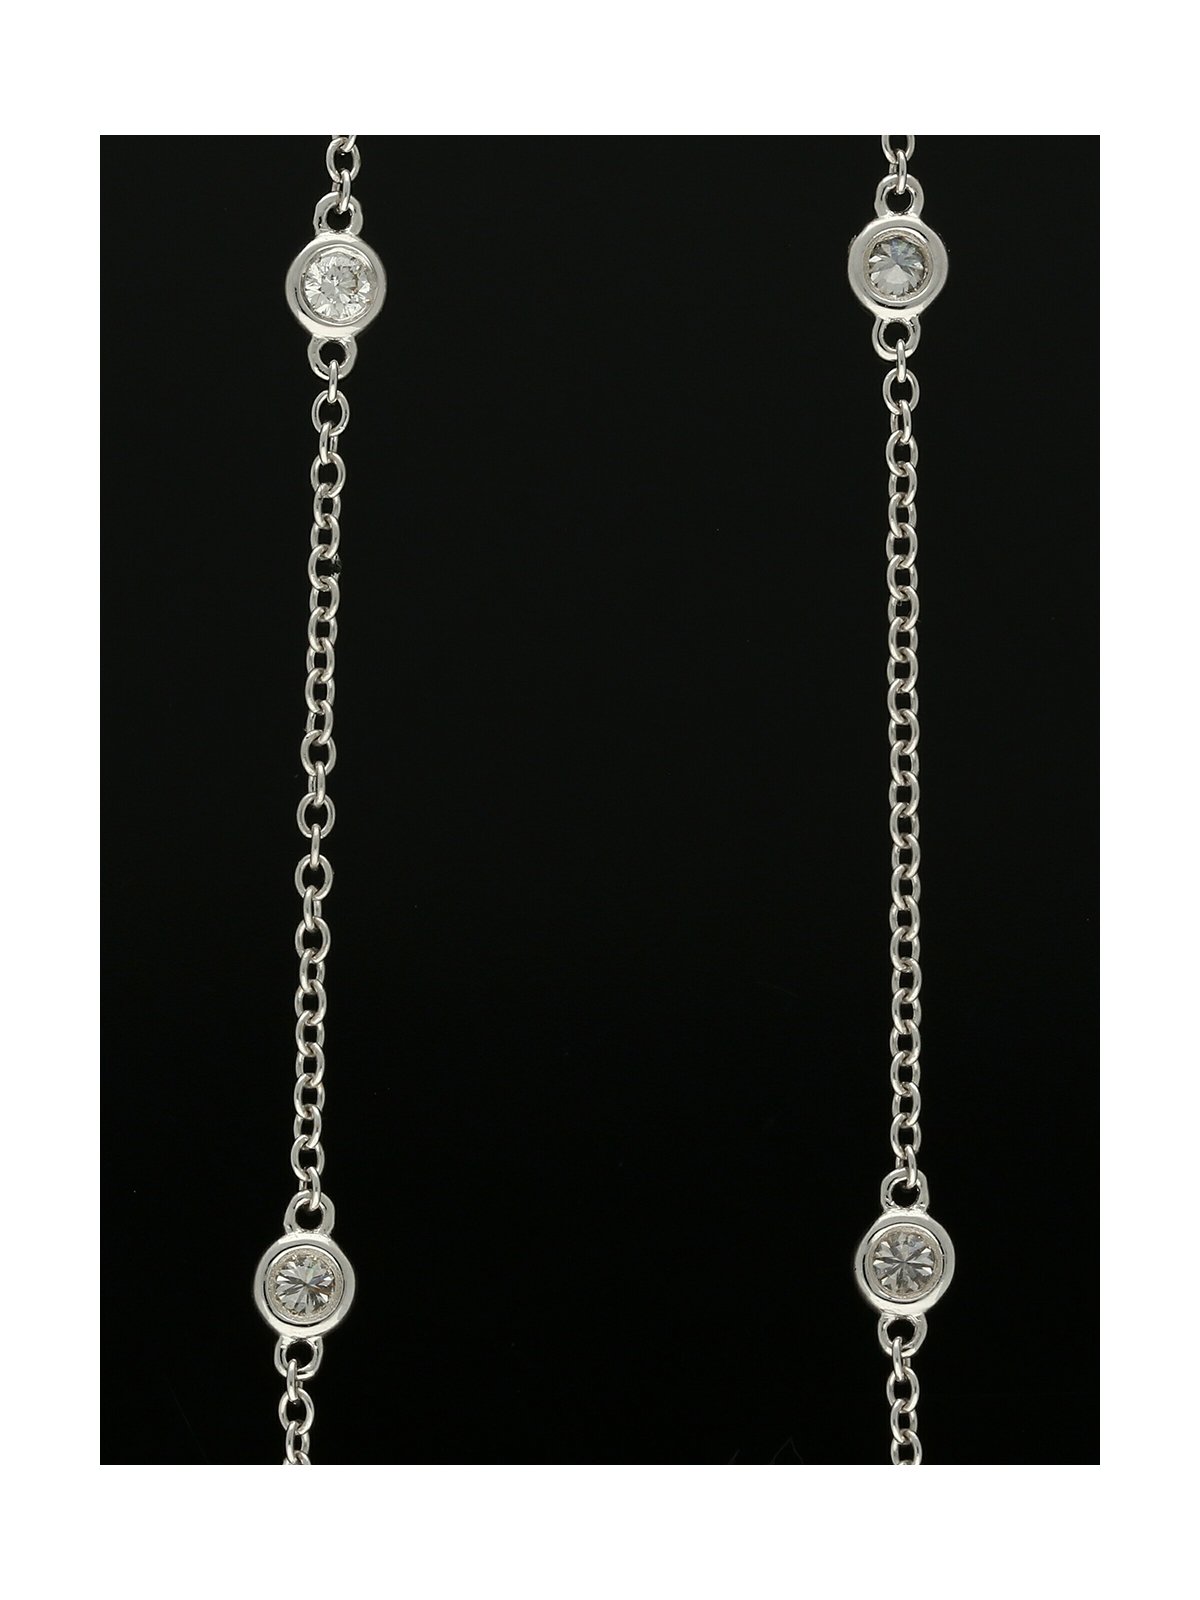 Opal and Diamond Pendant Necklace in 18ct White Gold